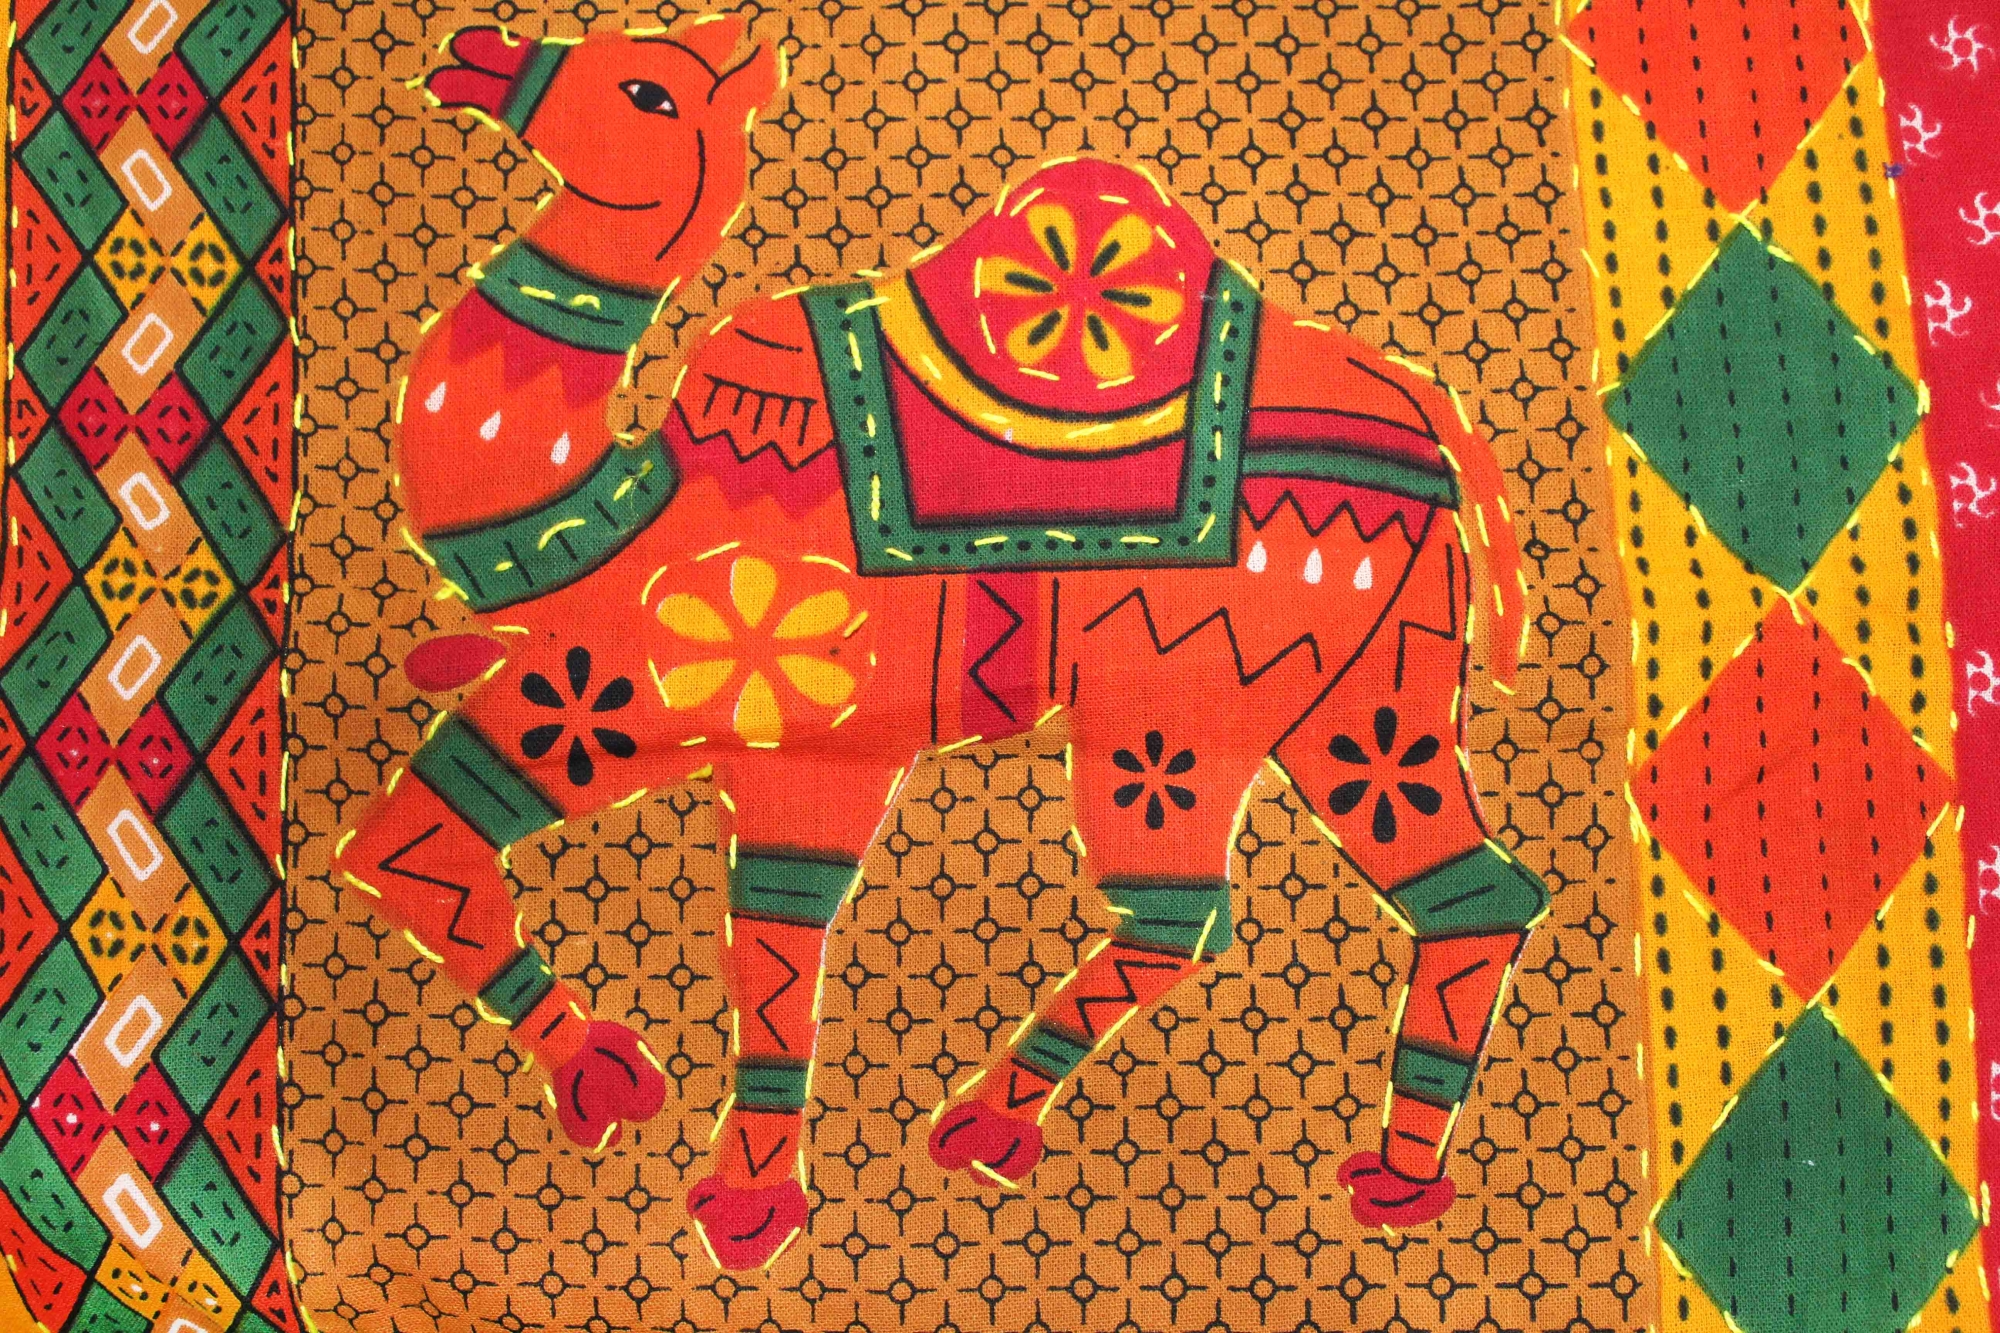 Yellow Jaisalmer Handmade Embroidery with Thread Work Elephant Print Double Bed Sheet with Two Pillow Covers